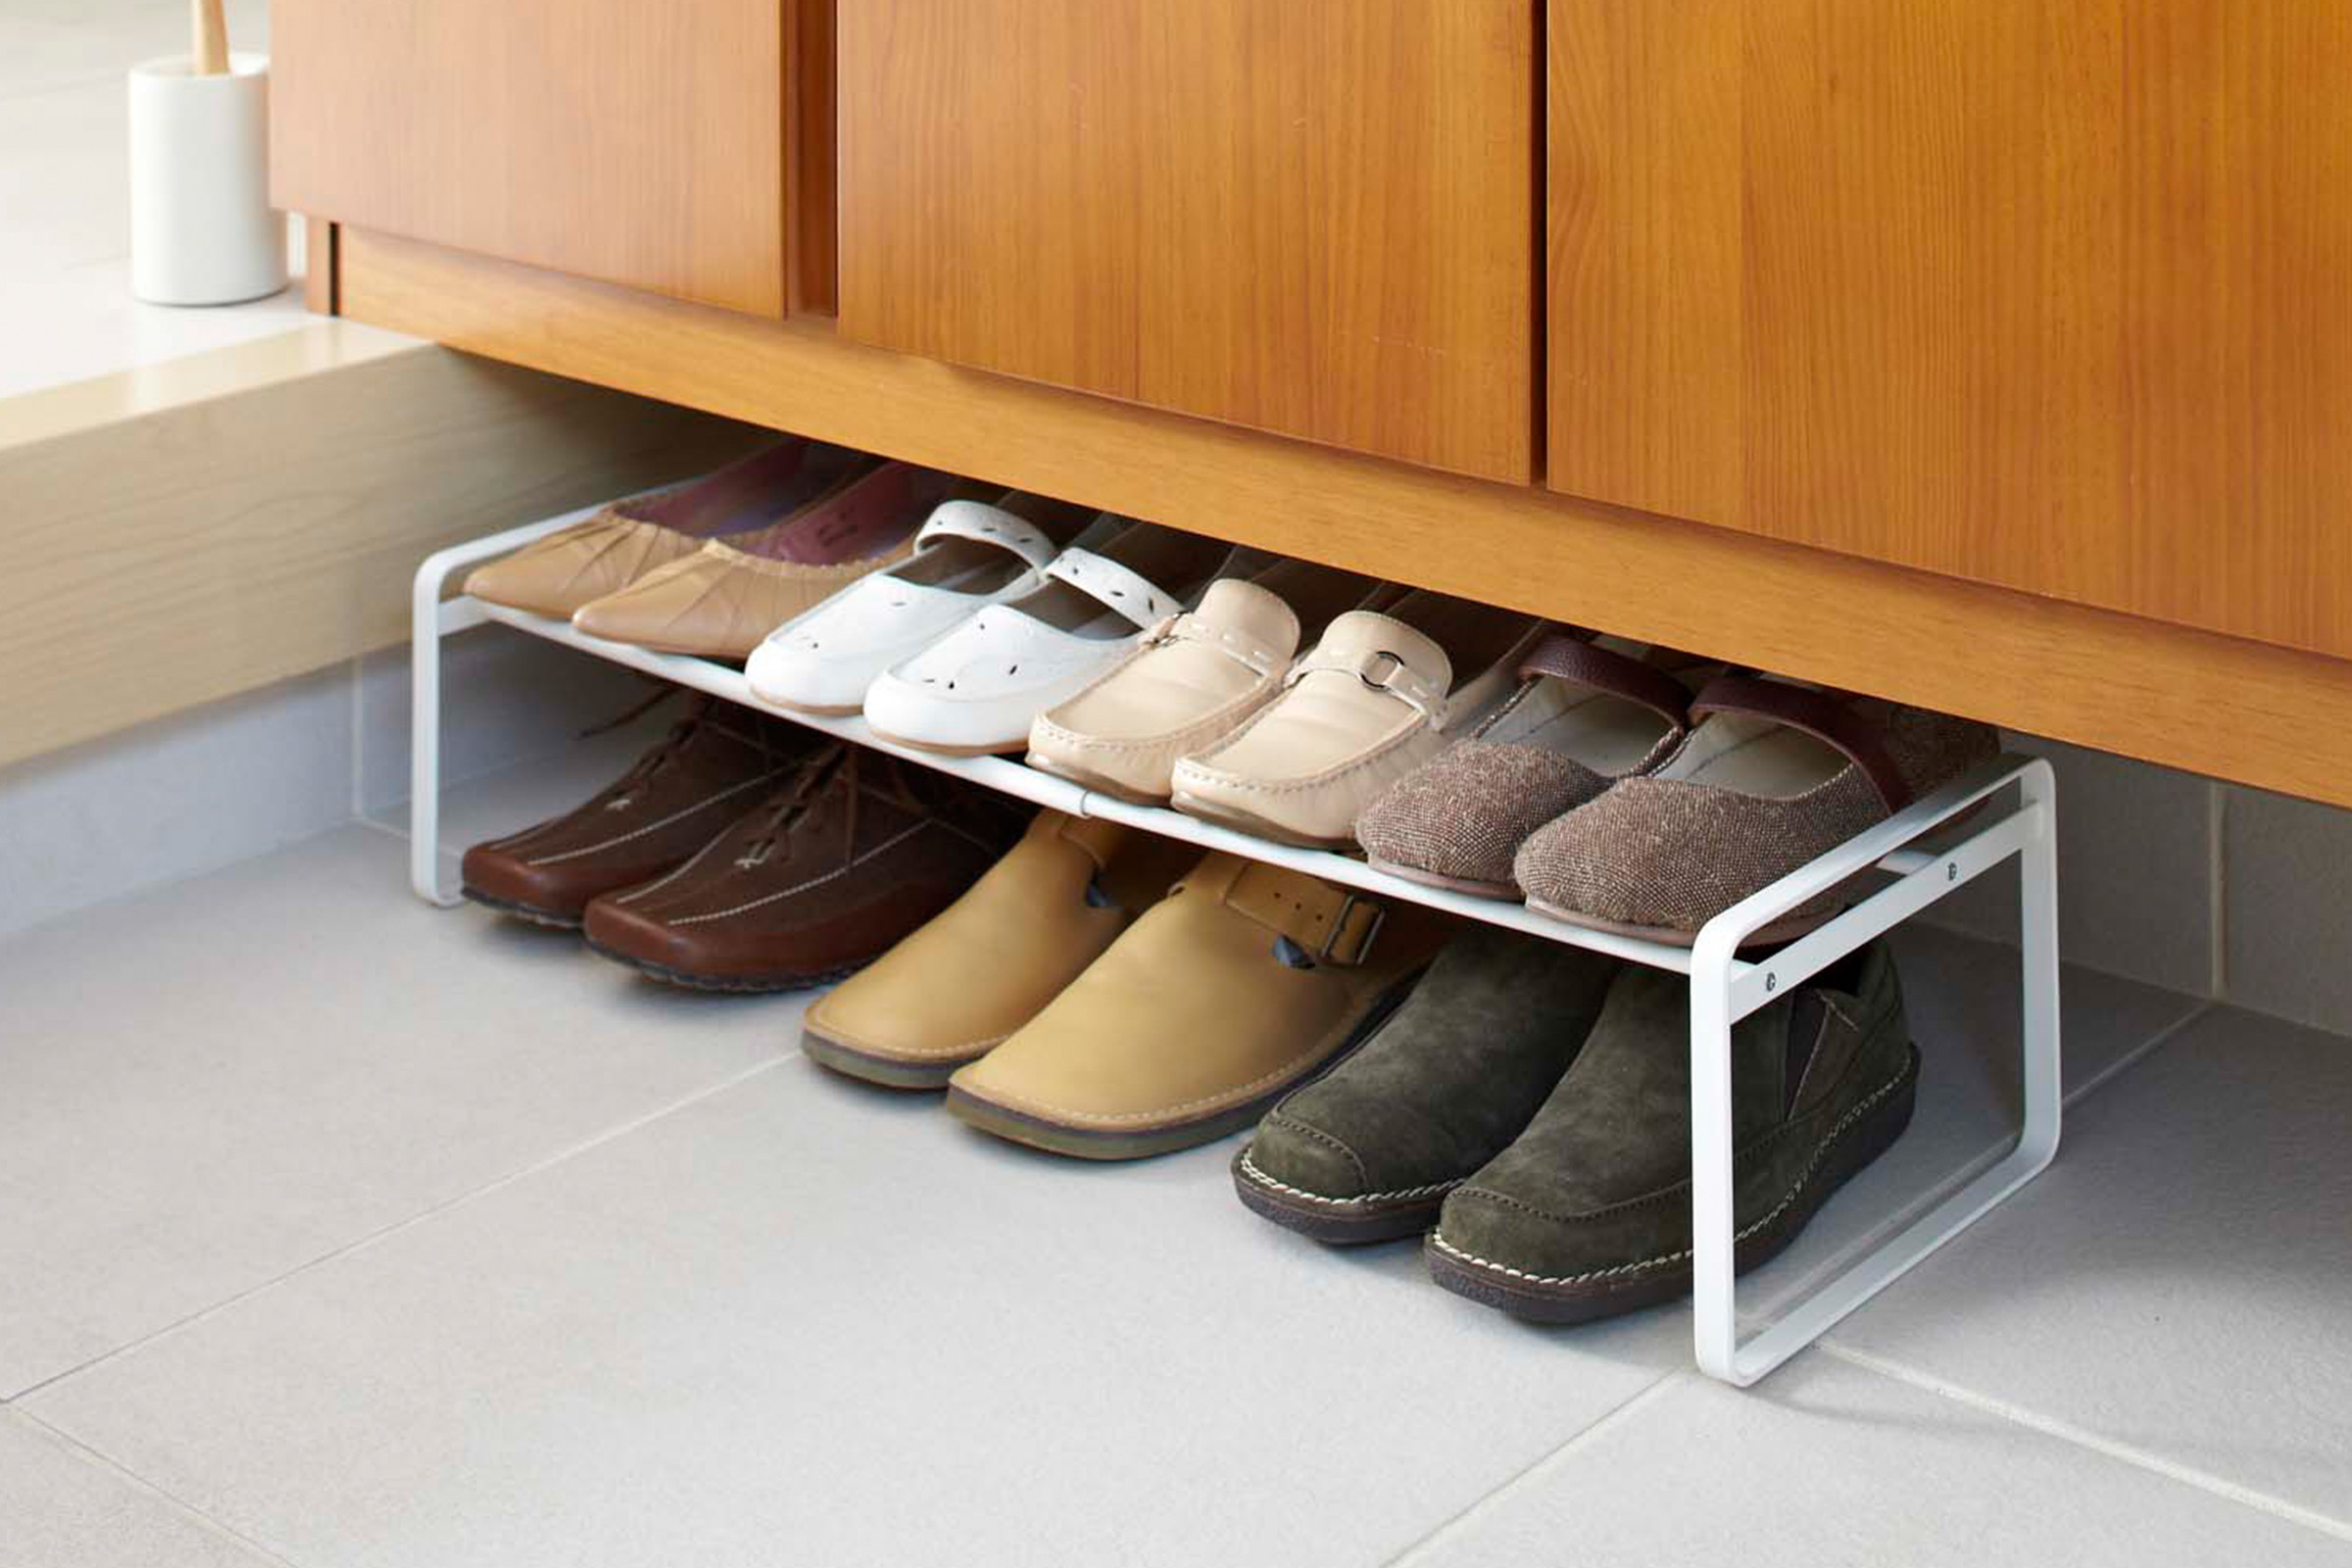 Stackable Shoe Rack by Yamazaki Home in white in an entryway holding seven pairs of shoes.